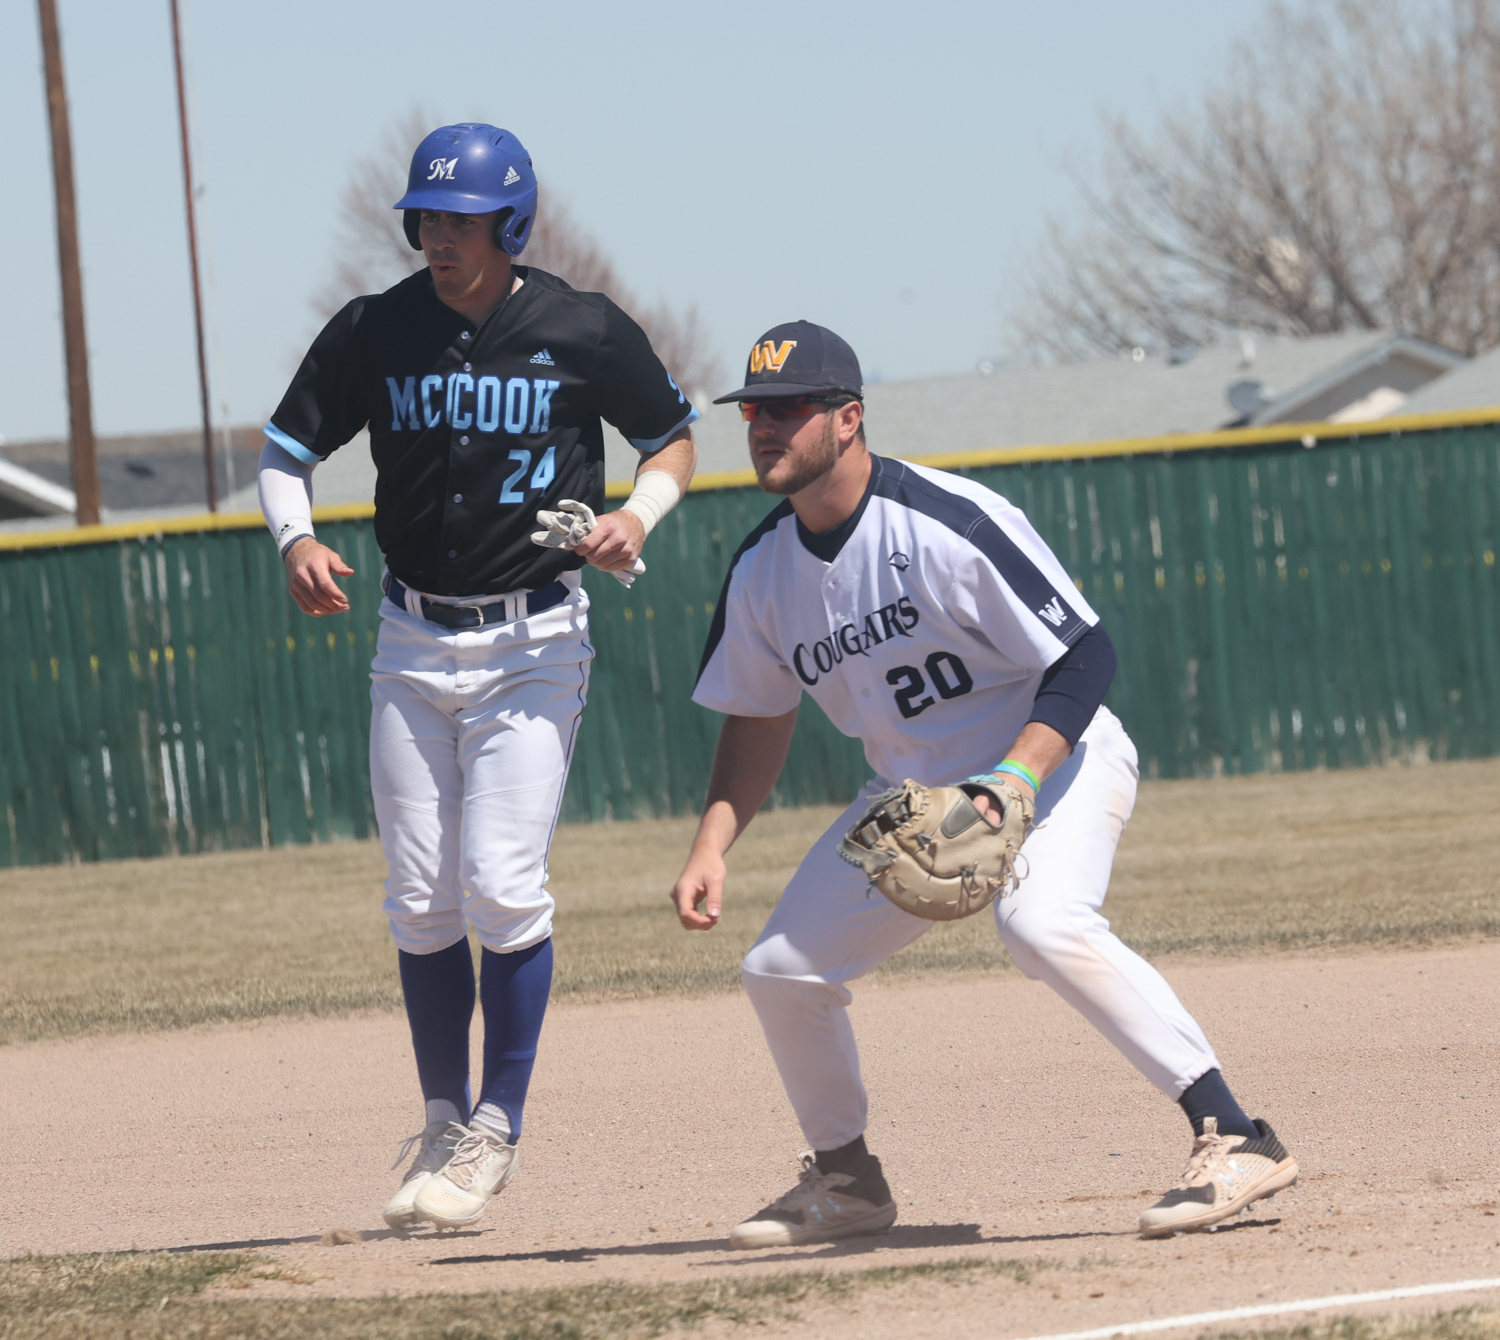 WNCC and McCook action from earlier in the season.